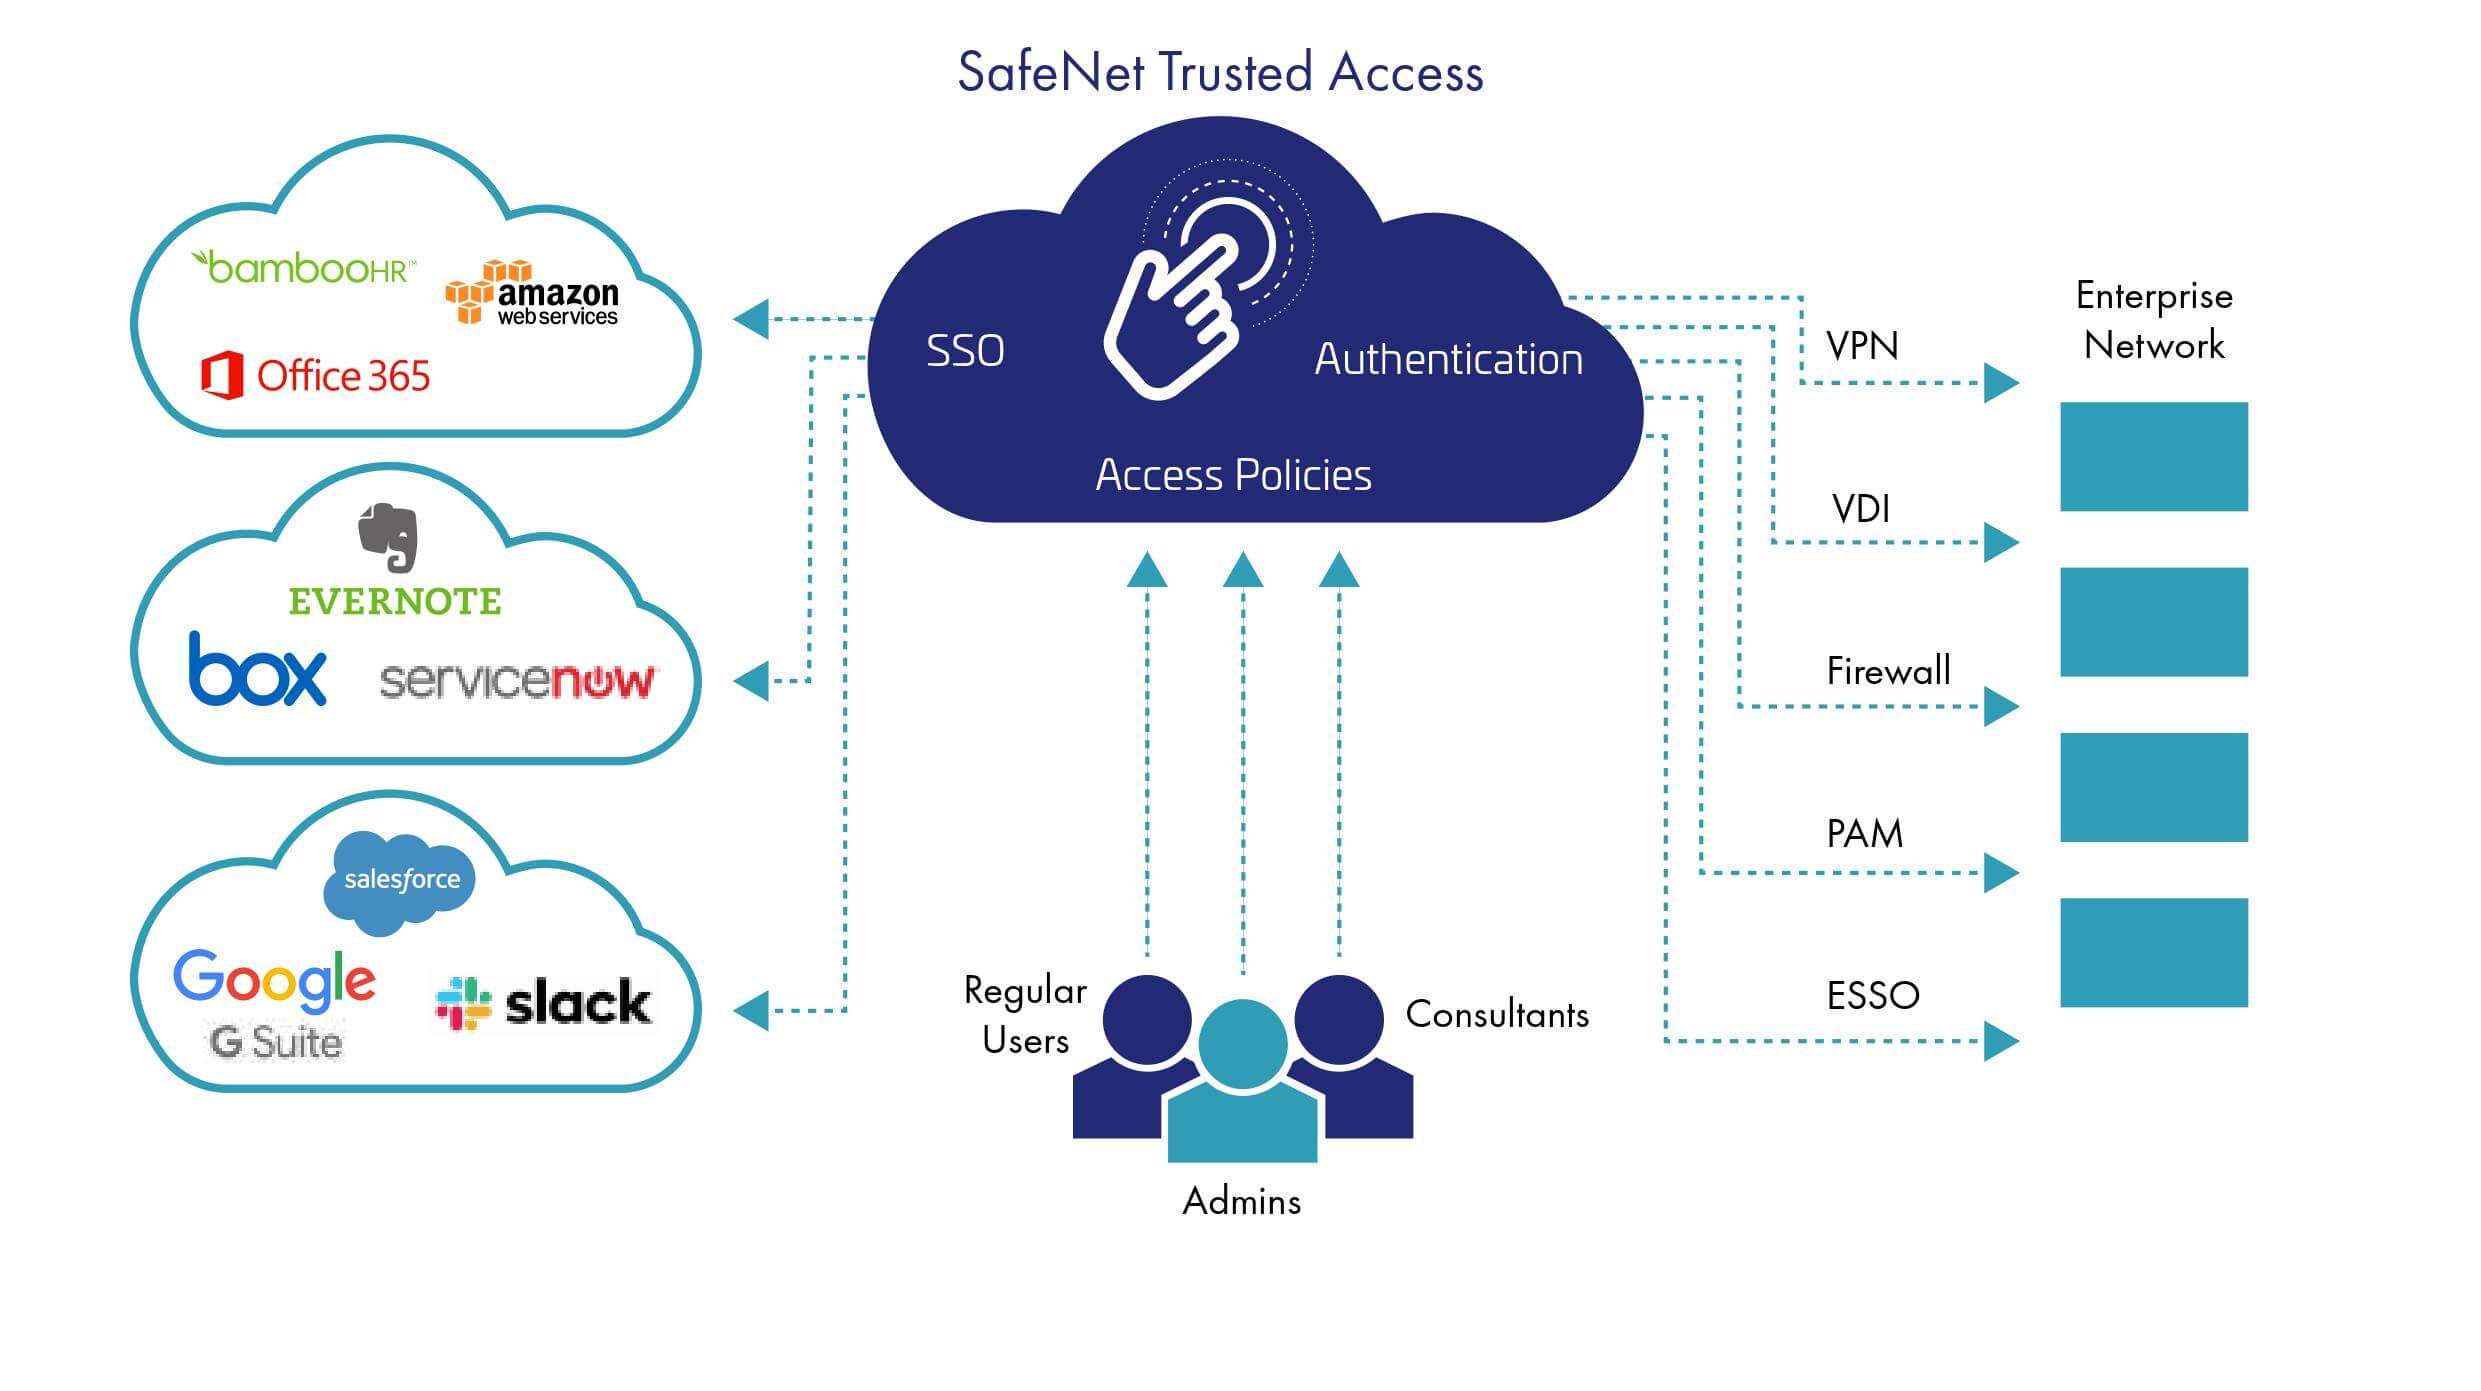 SafeNet Trusted Access